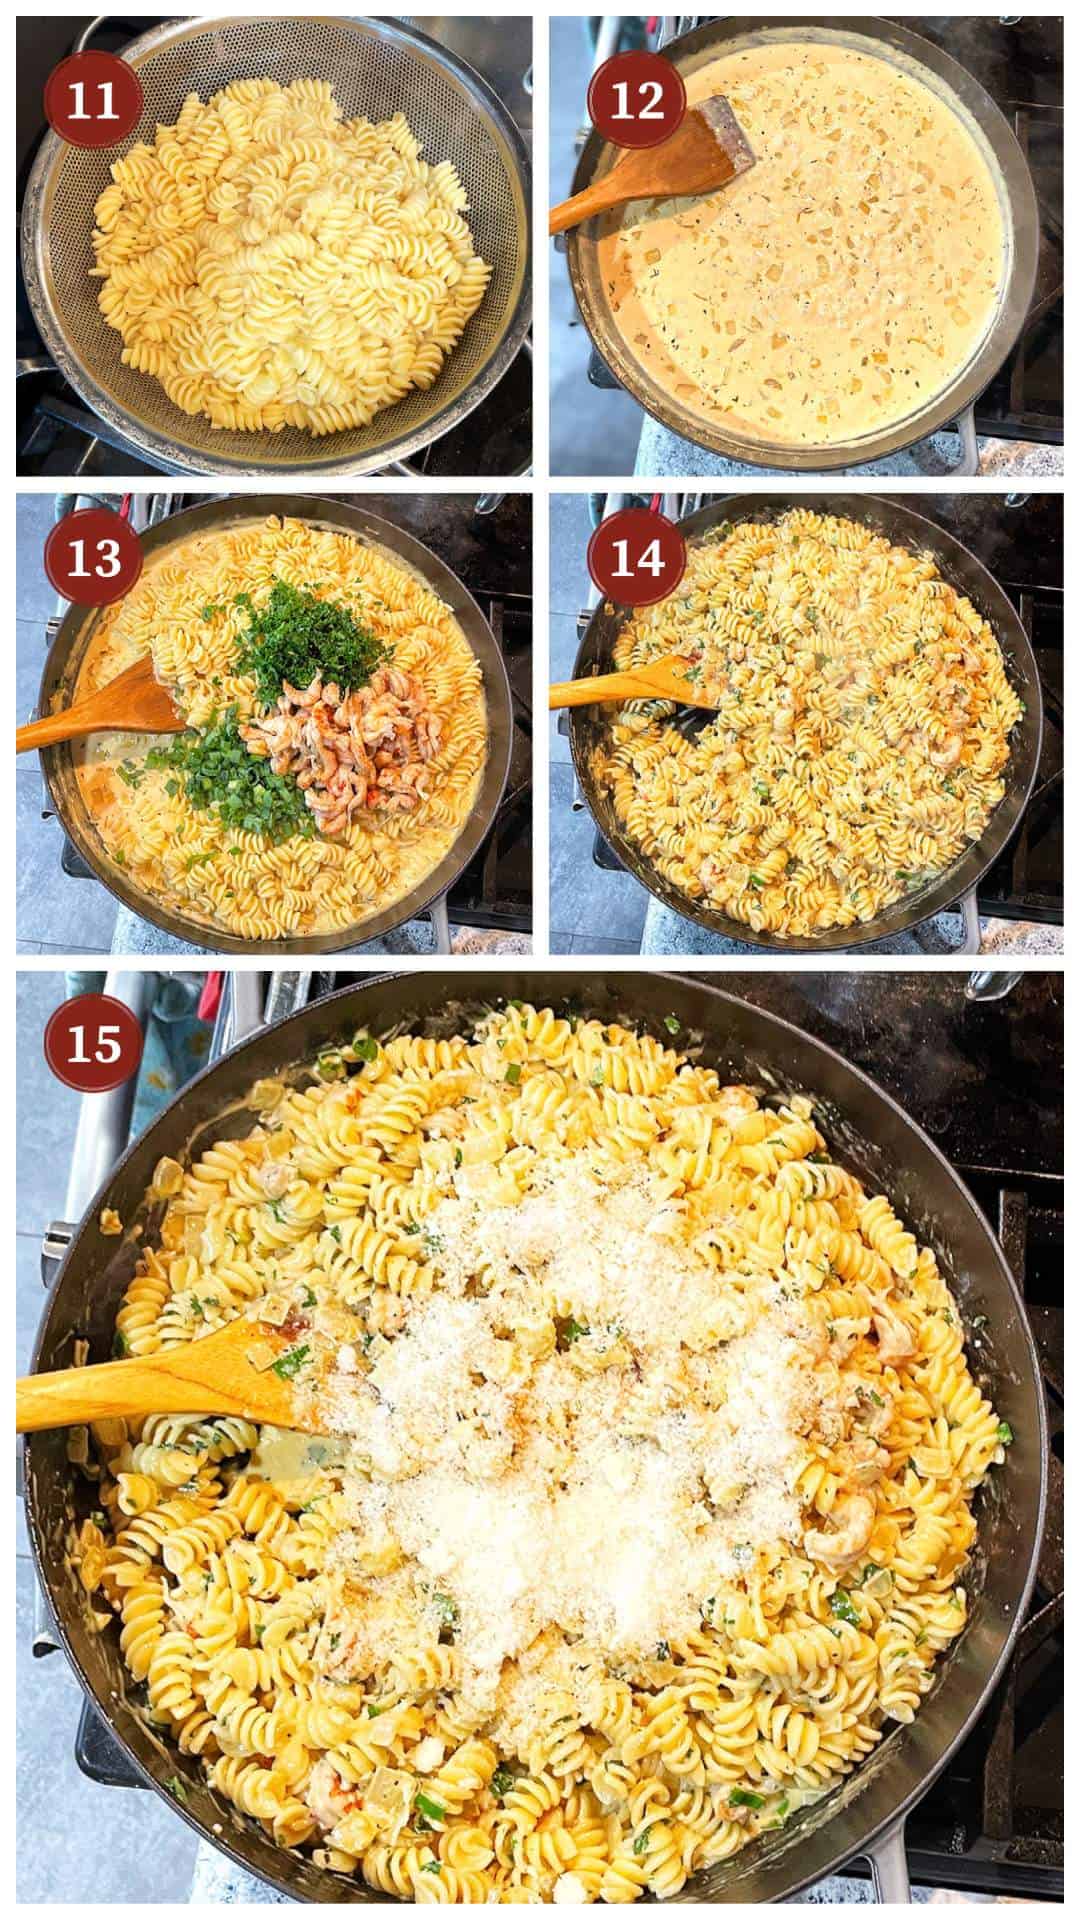 A collage of images showing how to make crawfish monica, steps 11 - 15.